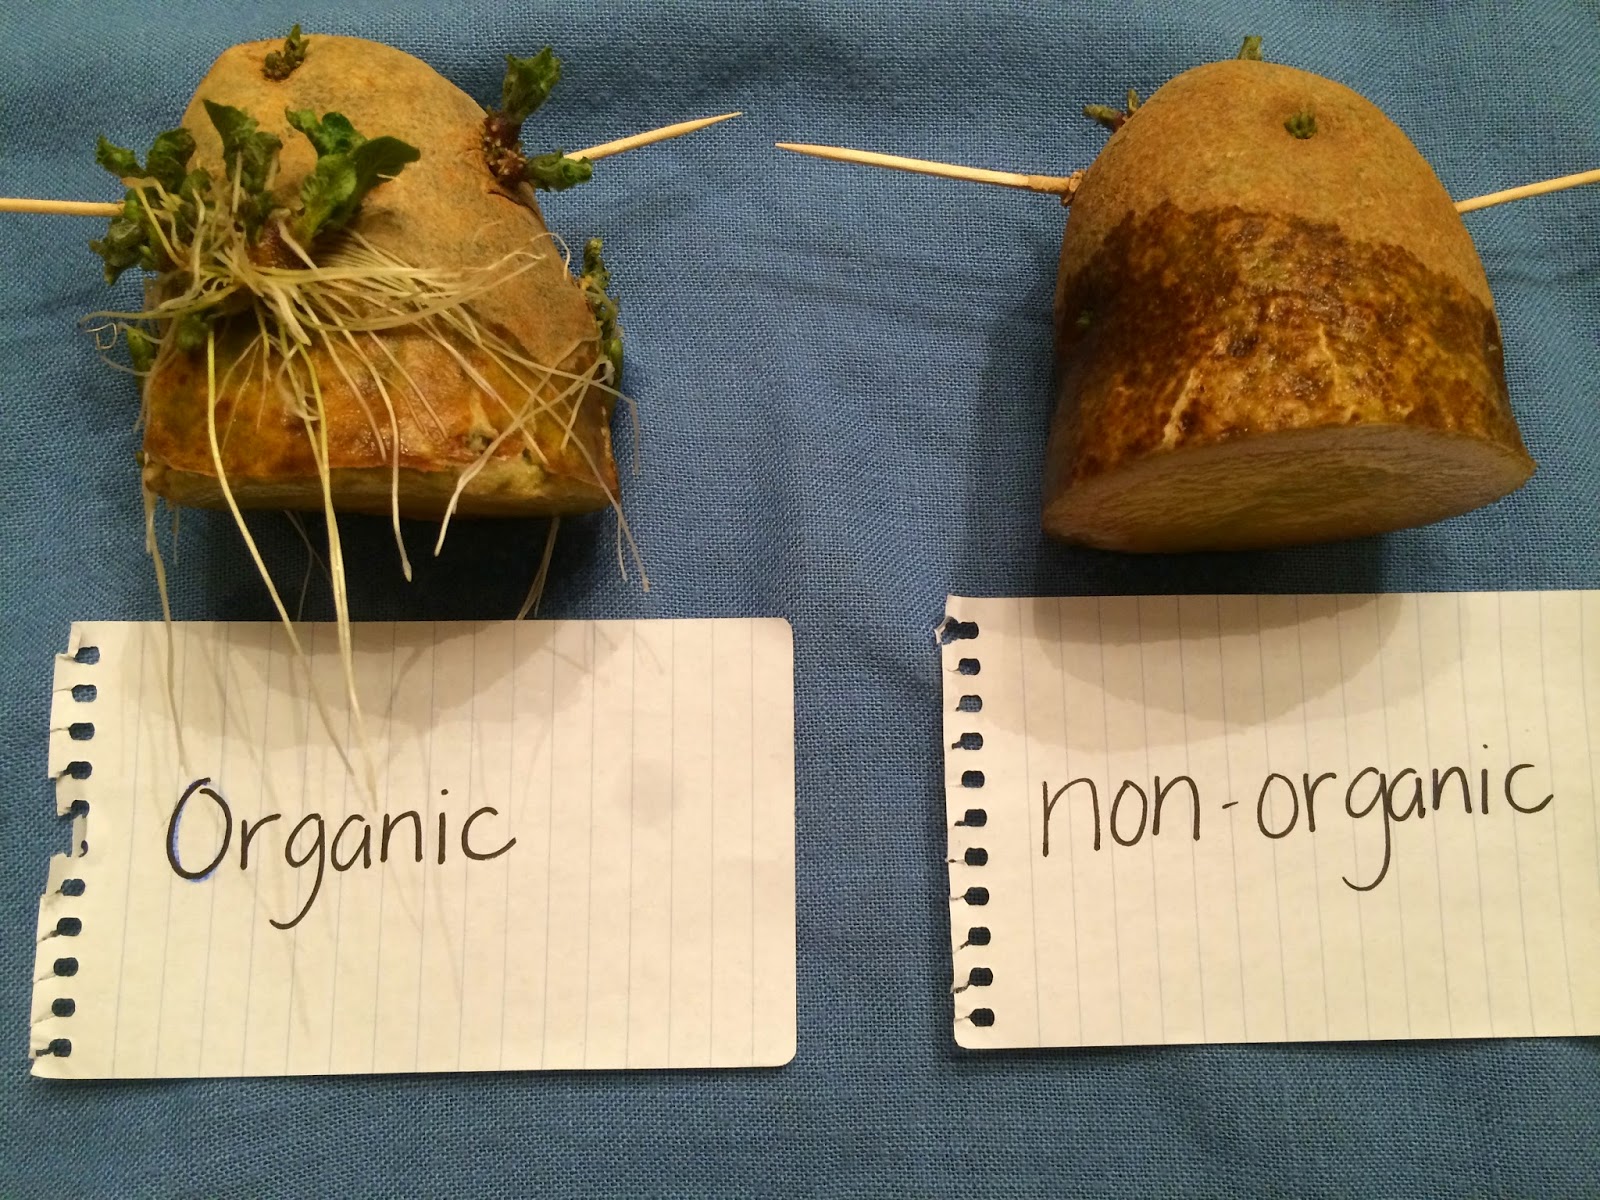 Organic Potatoes are Better for You, Research Shows